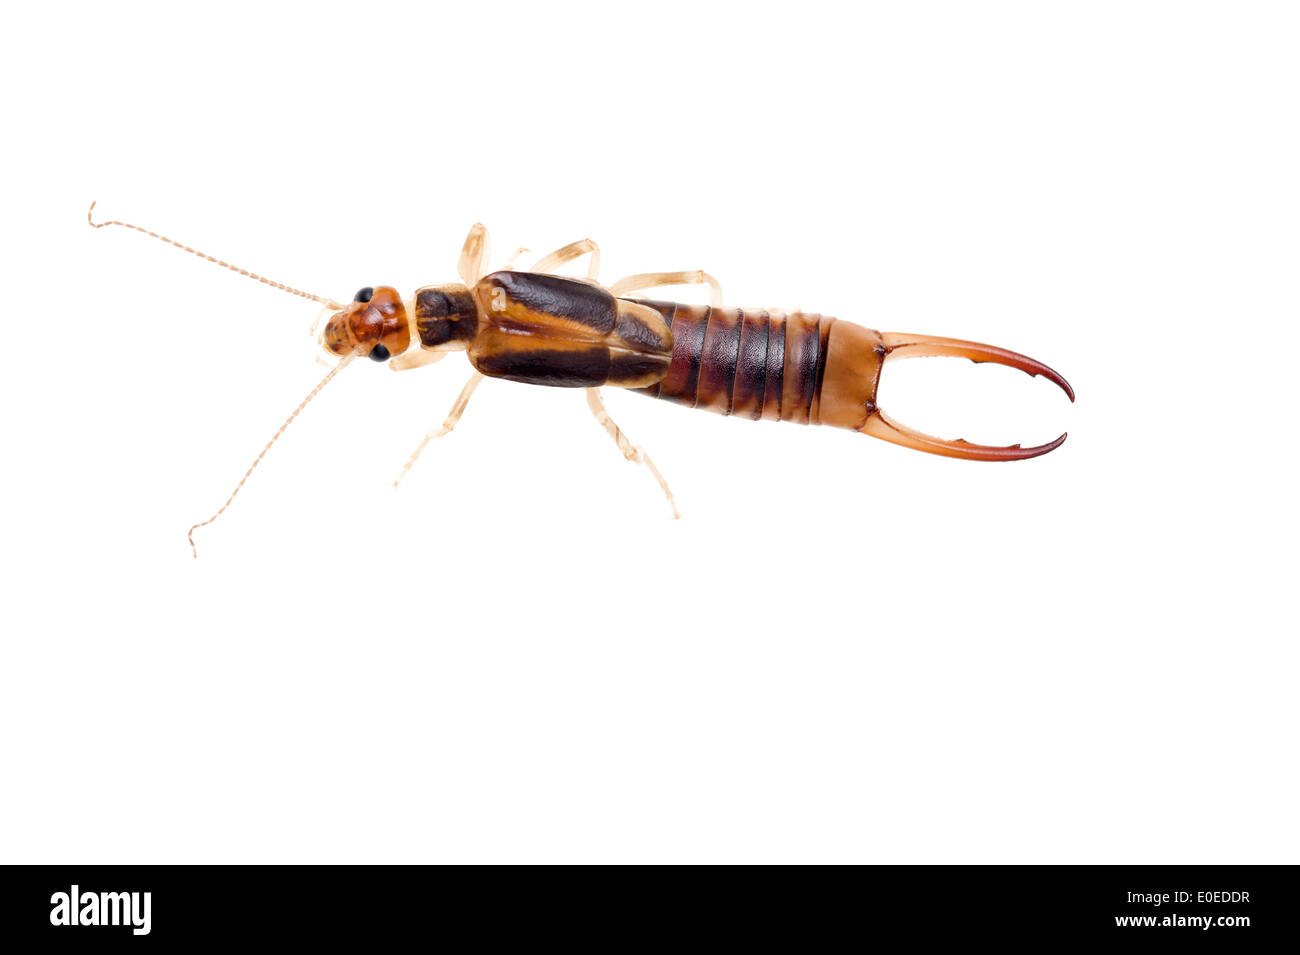 The common brown earwig is not a pest, it is a predator. Stock Photo